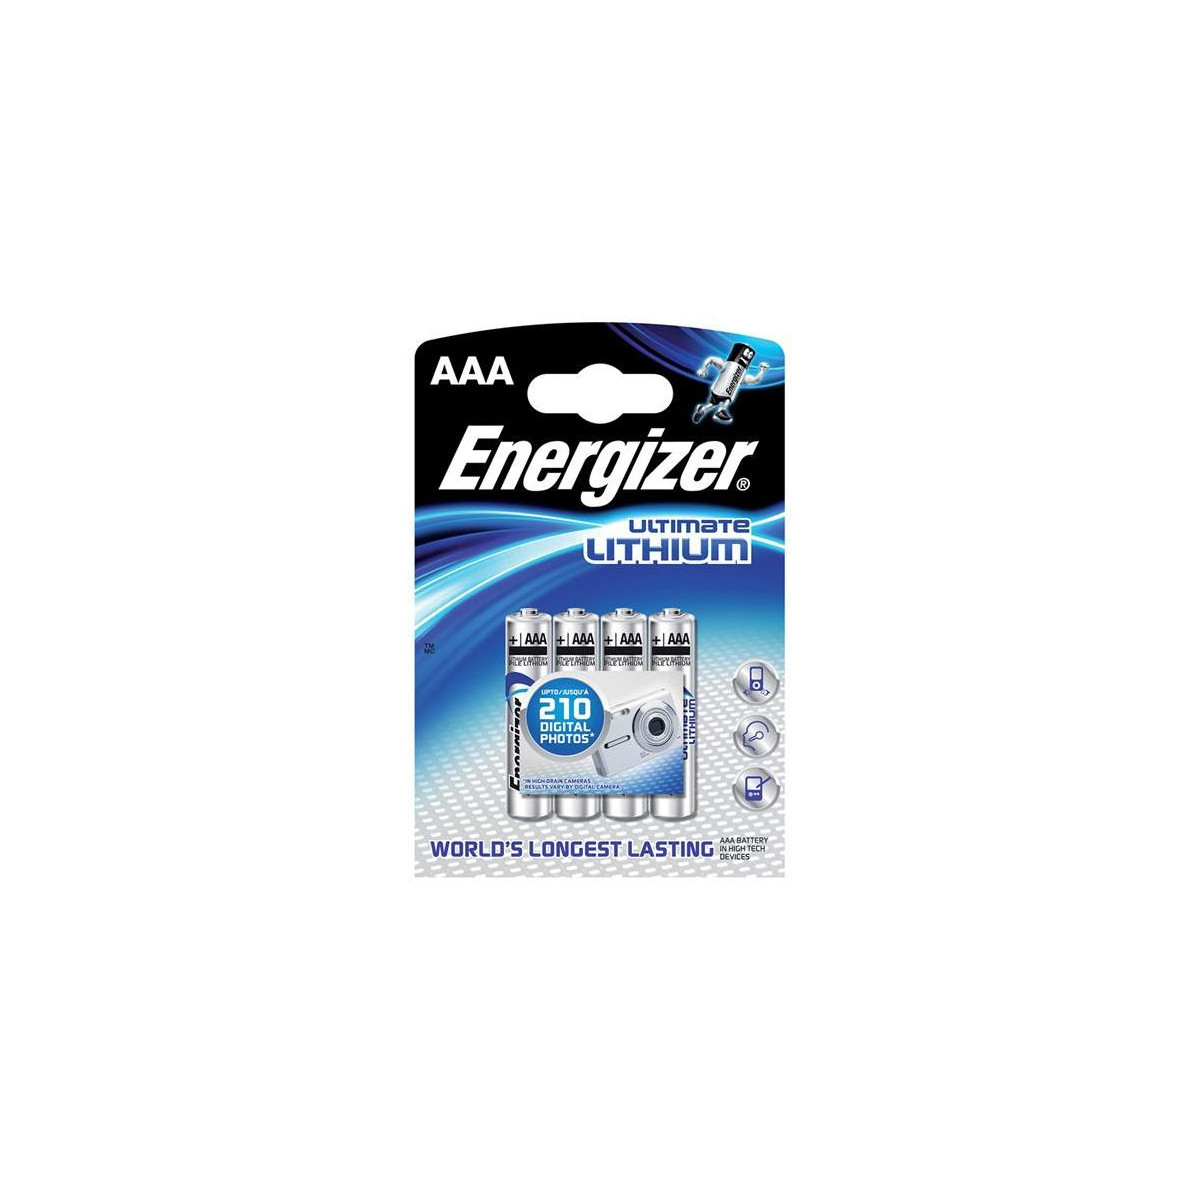 More about Baterie lithiová AAA R03 1,5V ENERGIZER Ultimate 4ks / blistr